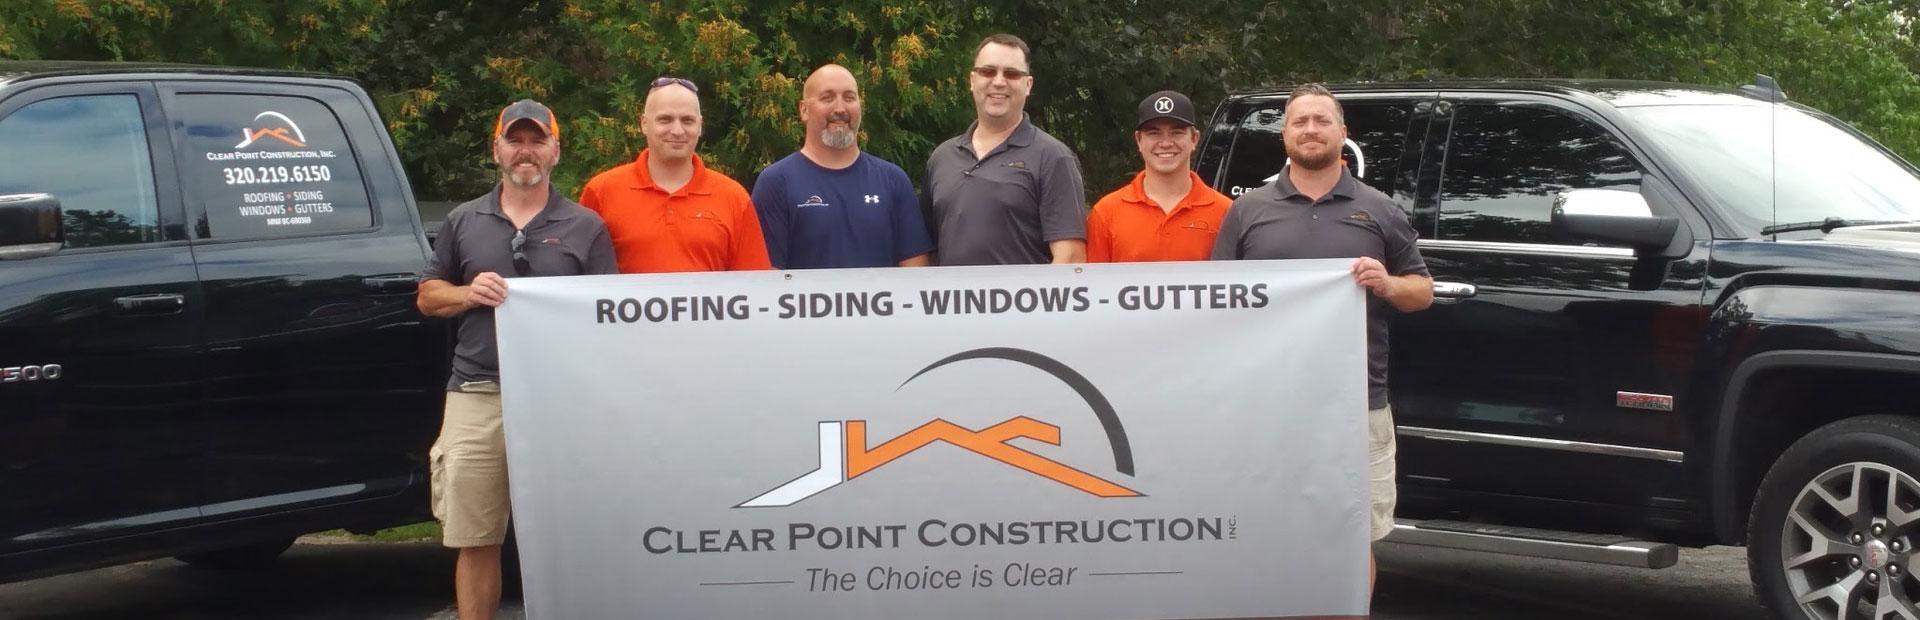 Clear Point Construction, Inc. Images